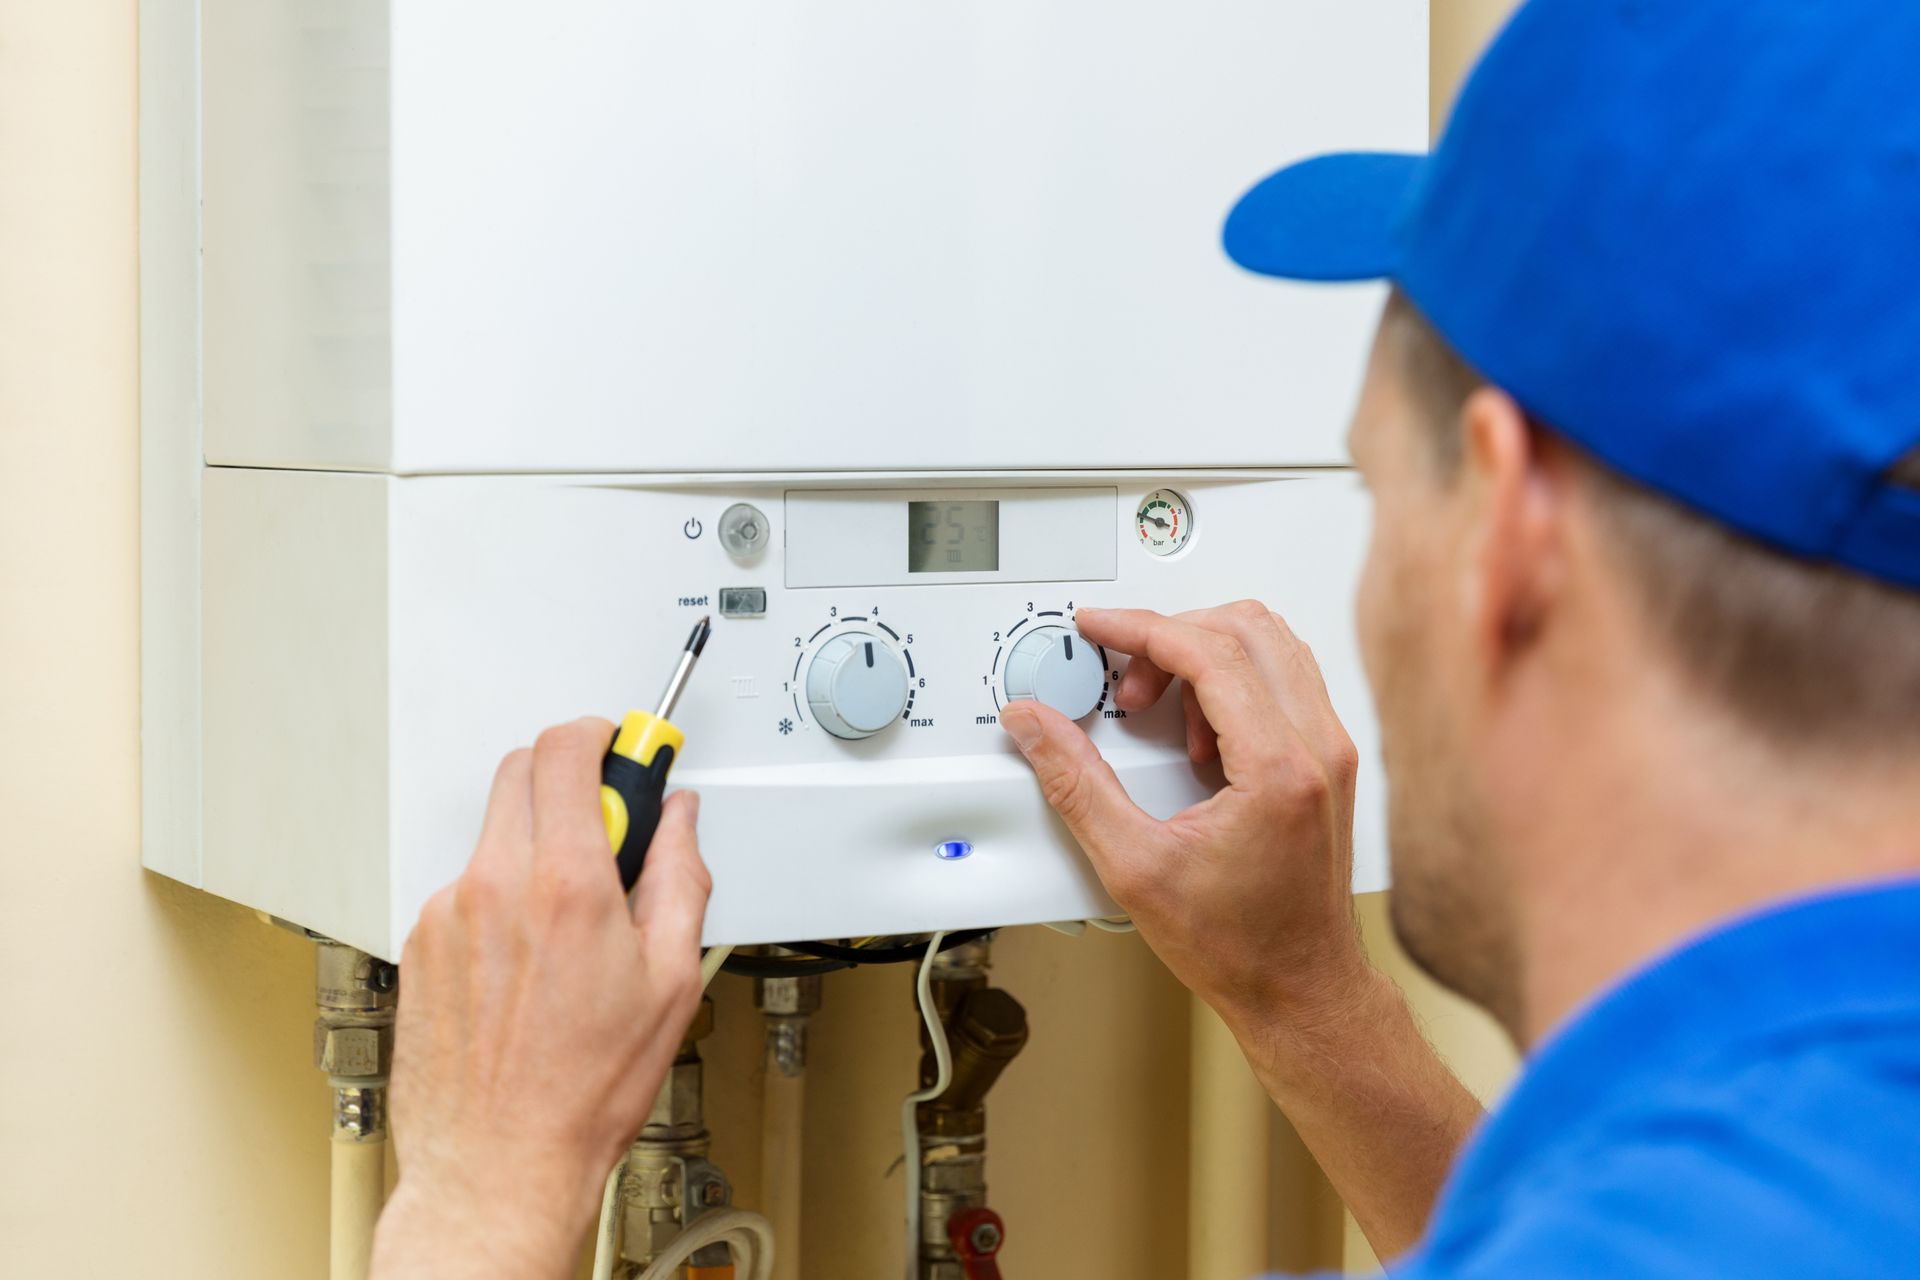 An experienced  worker is setting up a central gas heating boiler at a residential home.